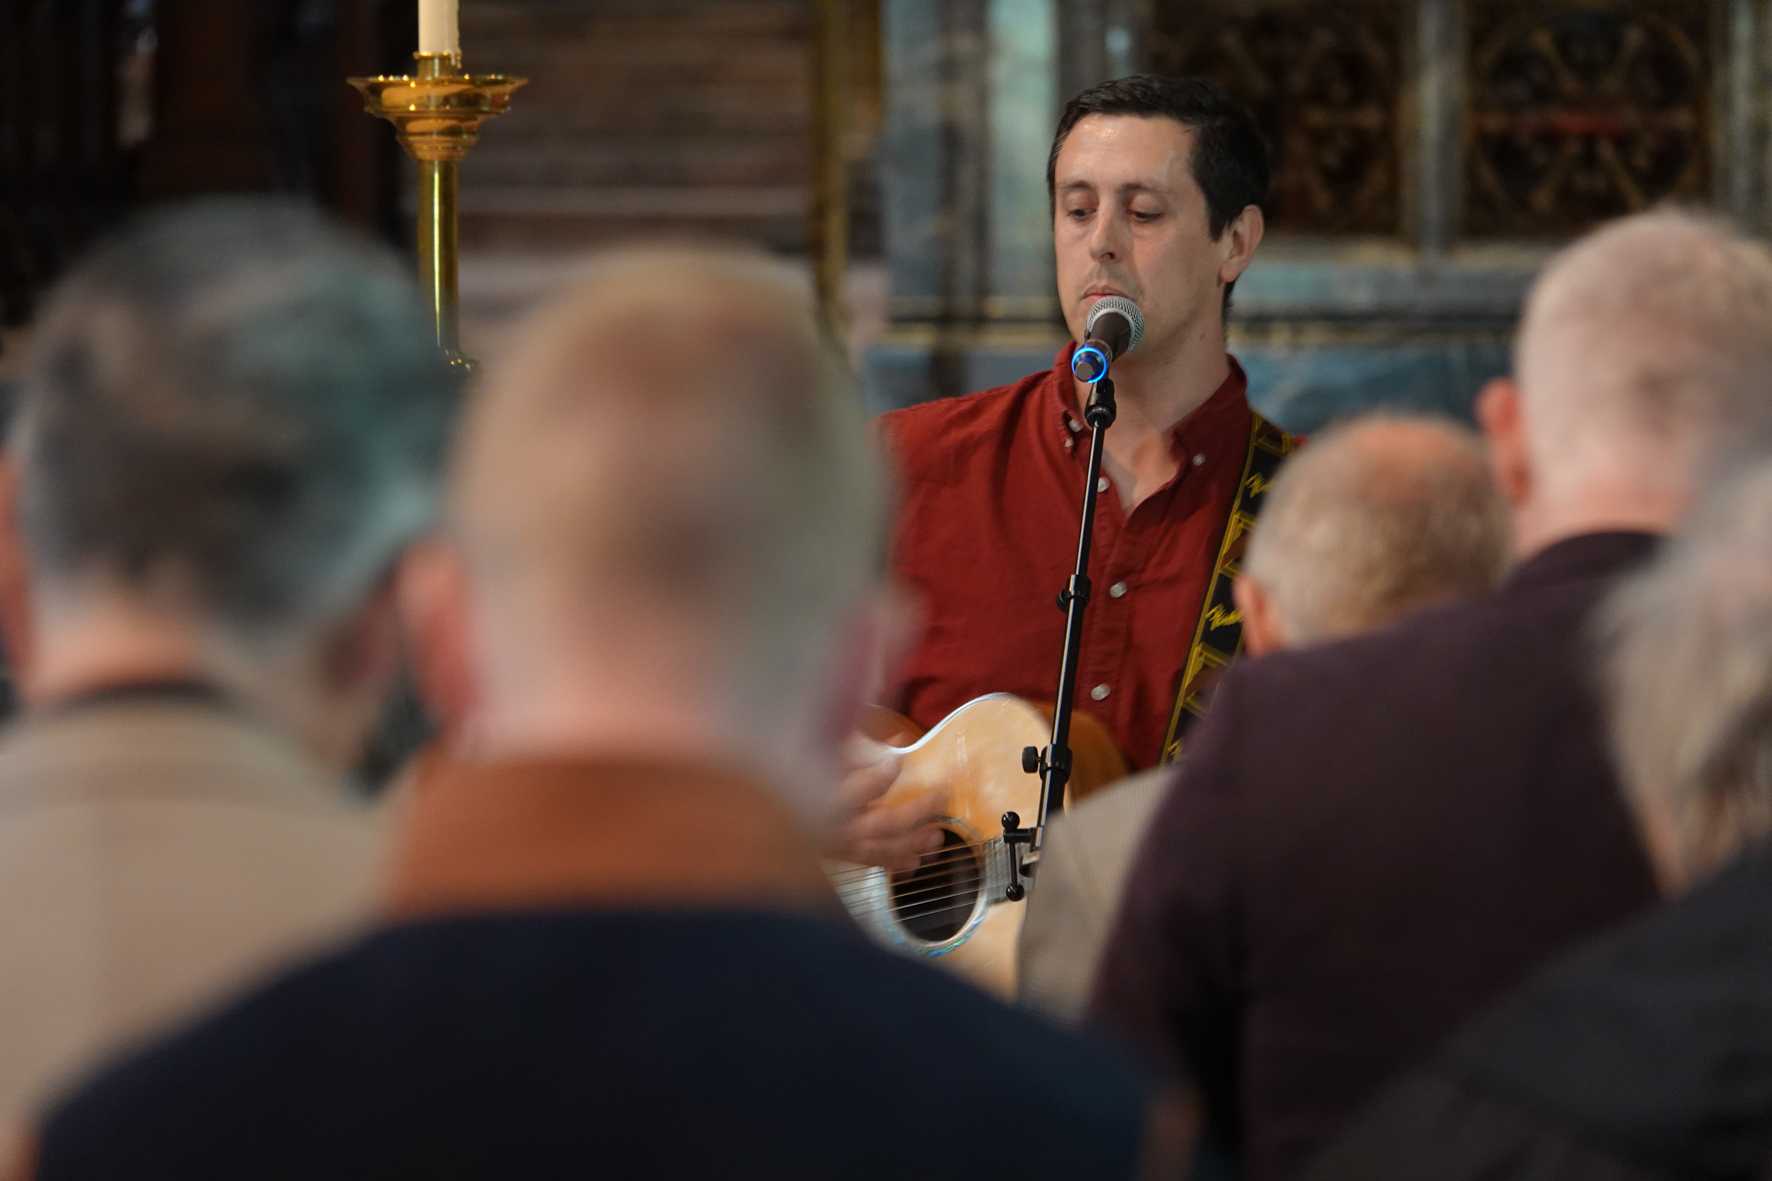 David Shaw with his guitar leading a congregation